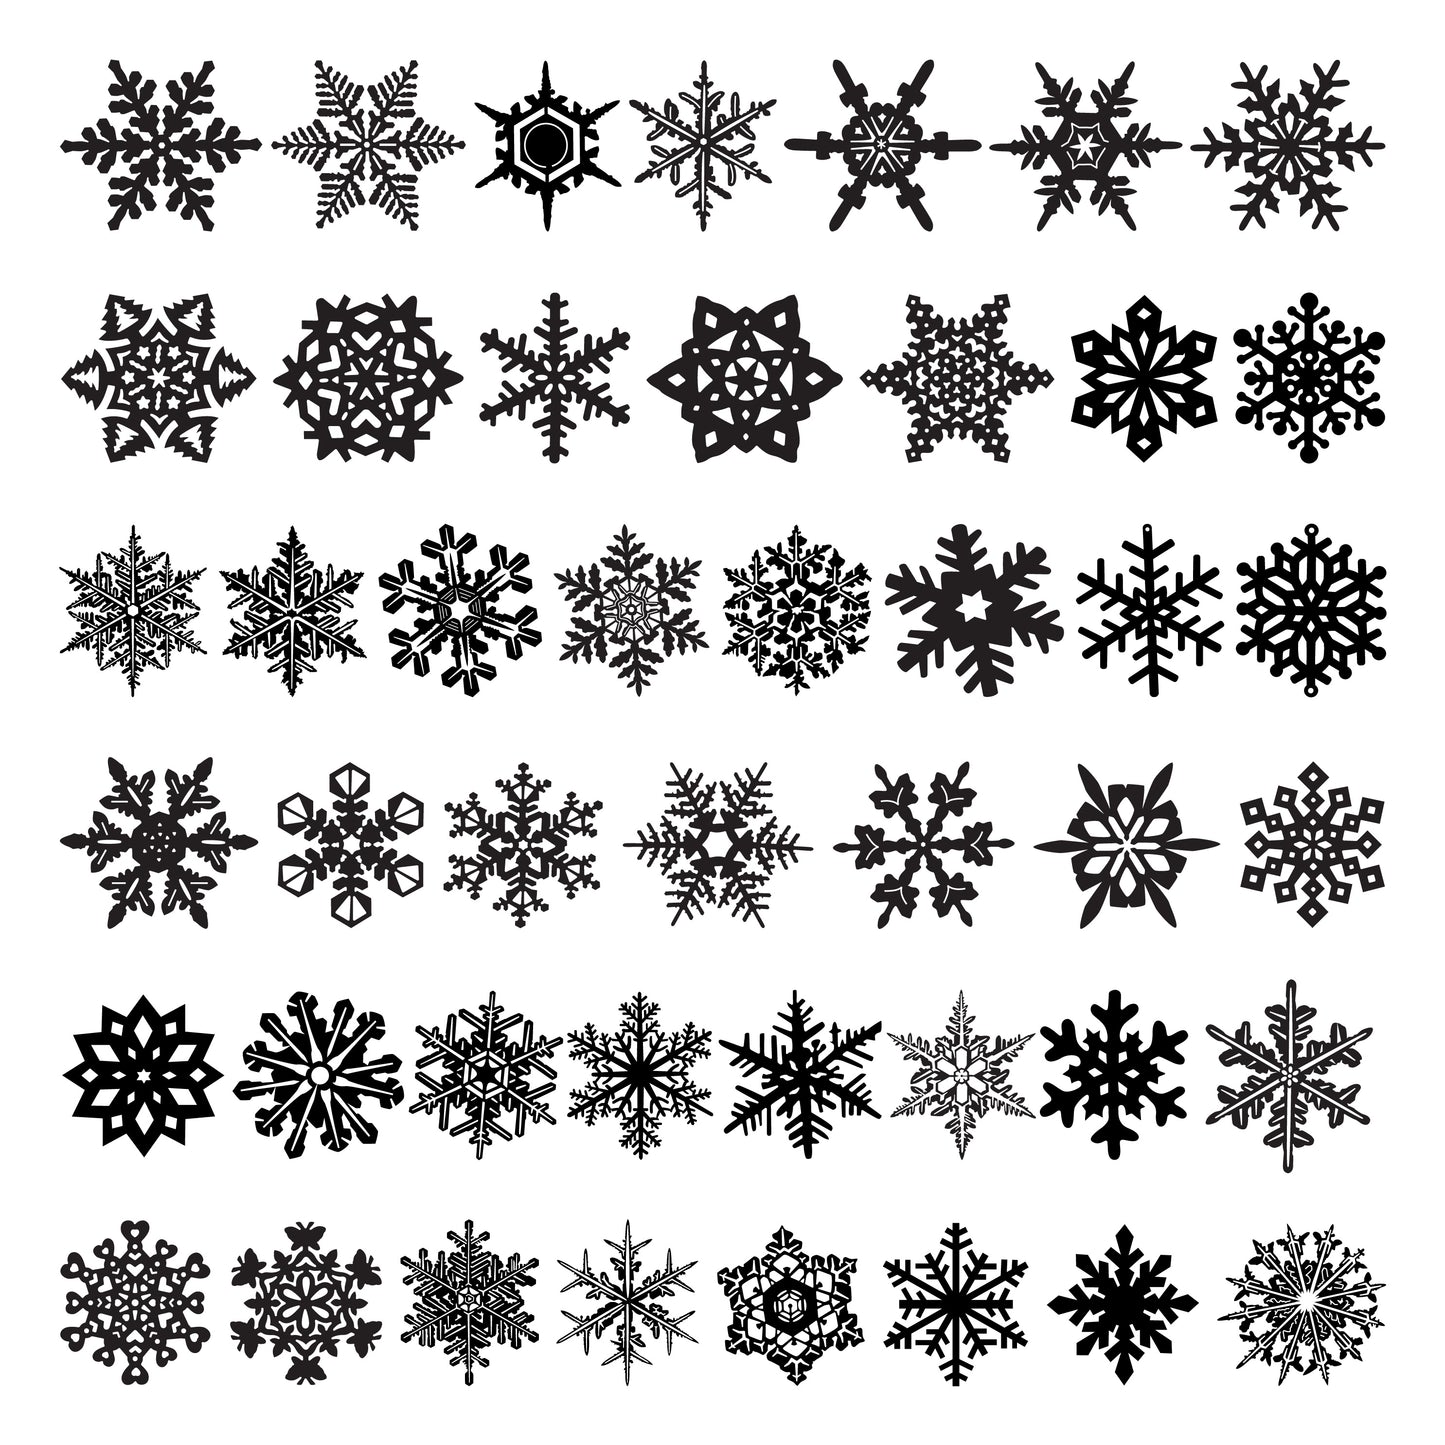 Snowflakes Ice Crystals DXF Files for CNC Machines-DXFforCNC.com